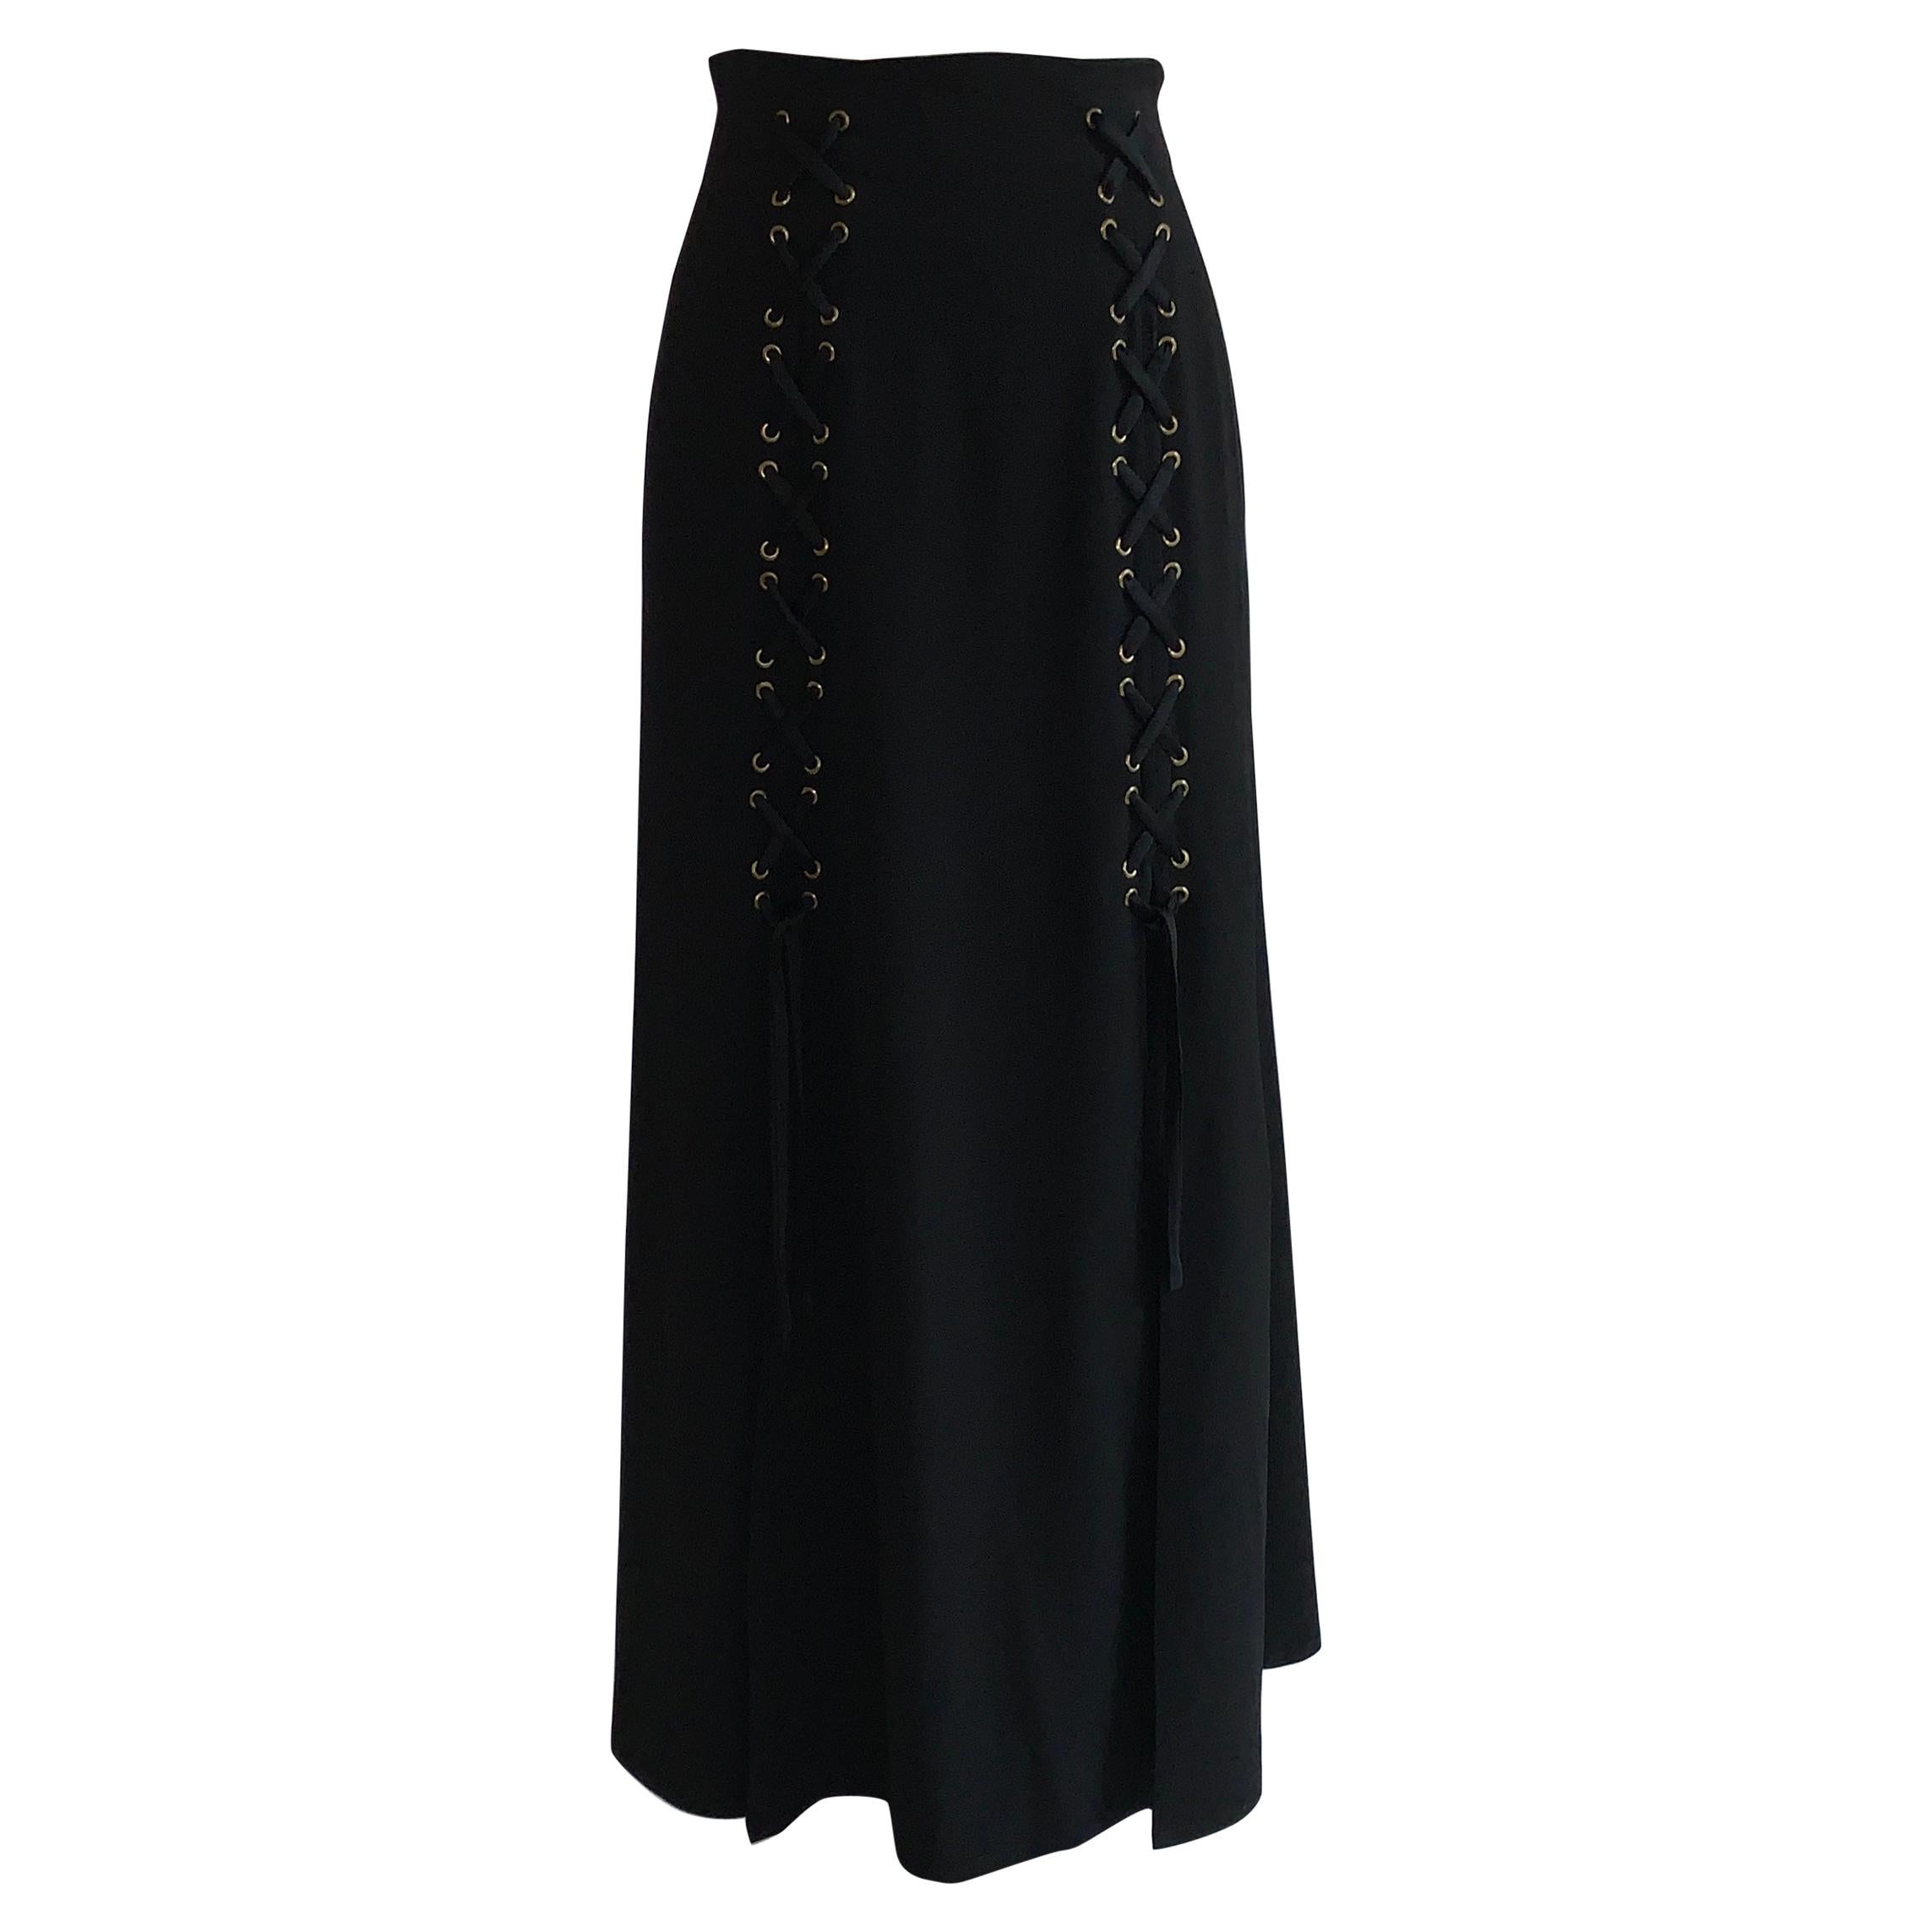 Cheap Skirts Summer Skirts for Women, Womens Chic Elastic High Waisted A  Line Pleated Shirring Midi-Long Skirt Causal Flowy Skirt for Special  Occasions Ladies Skirt Dress Black : Amazon.co.uk: Fashion